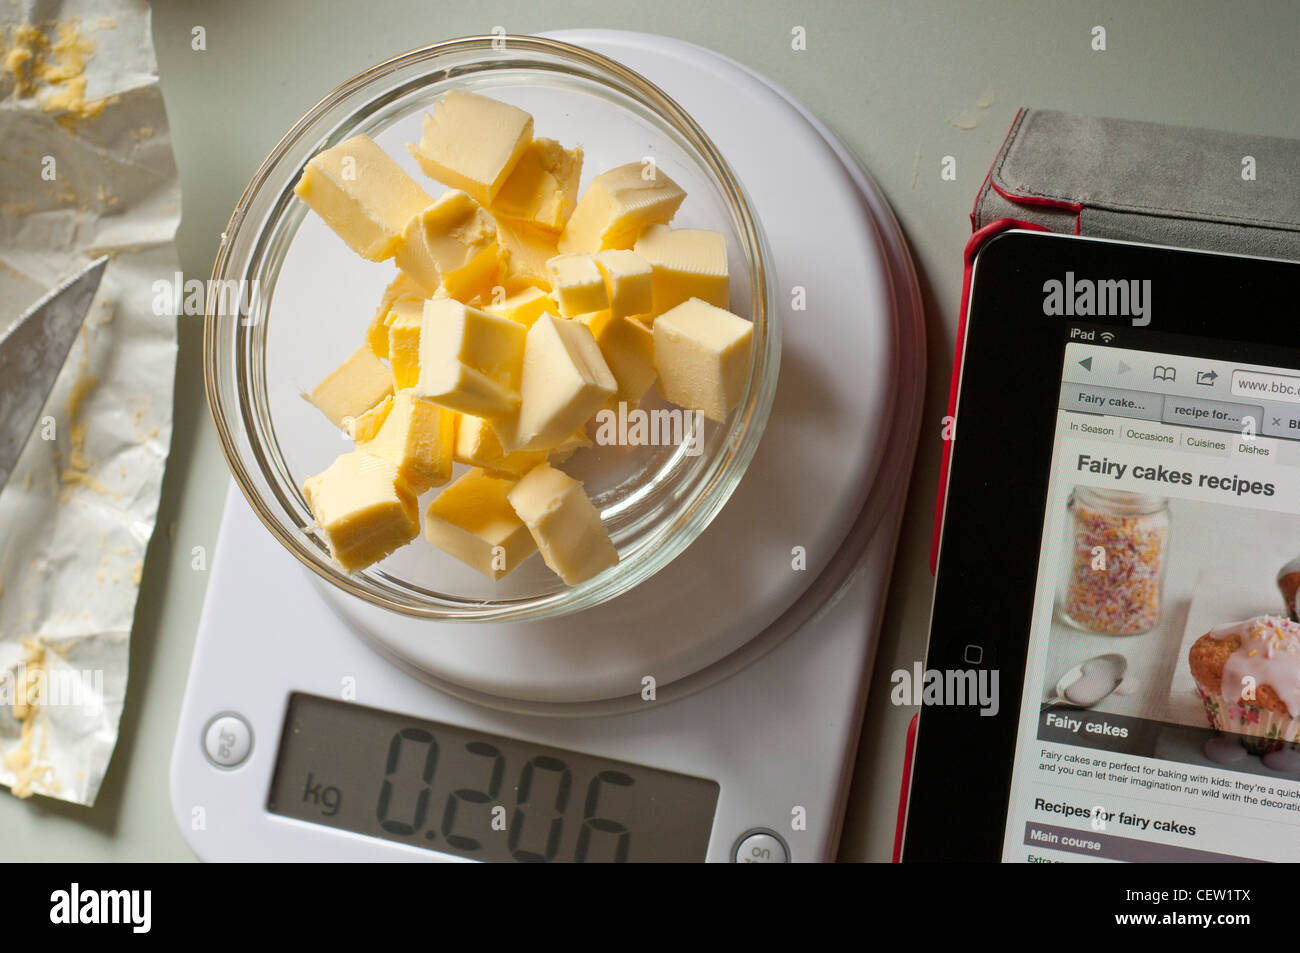 How to use a metric kitchen weighing scales 